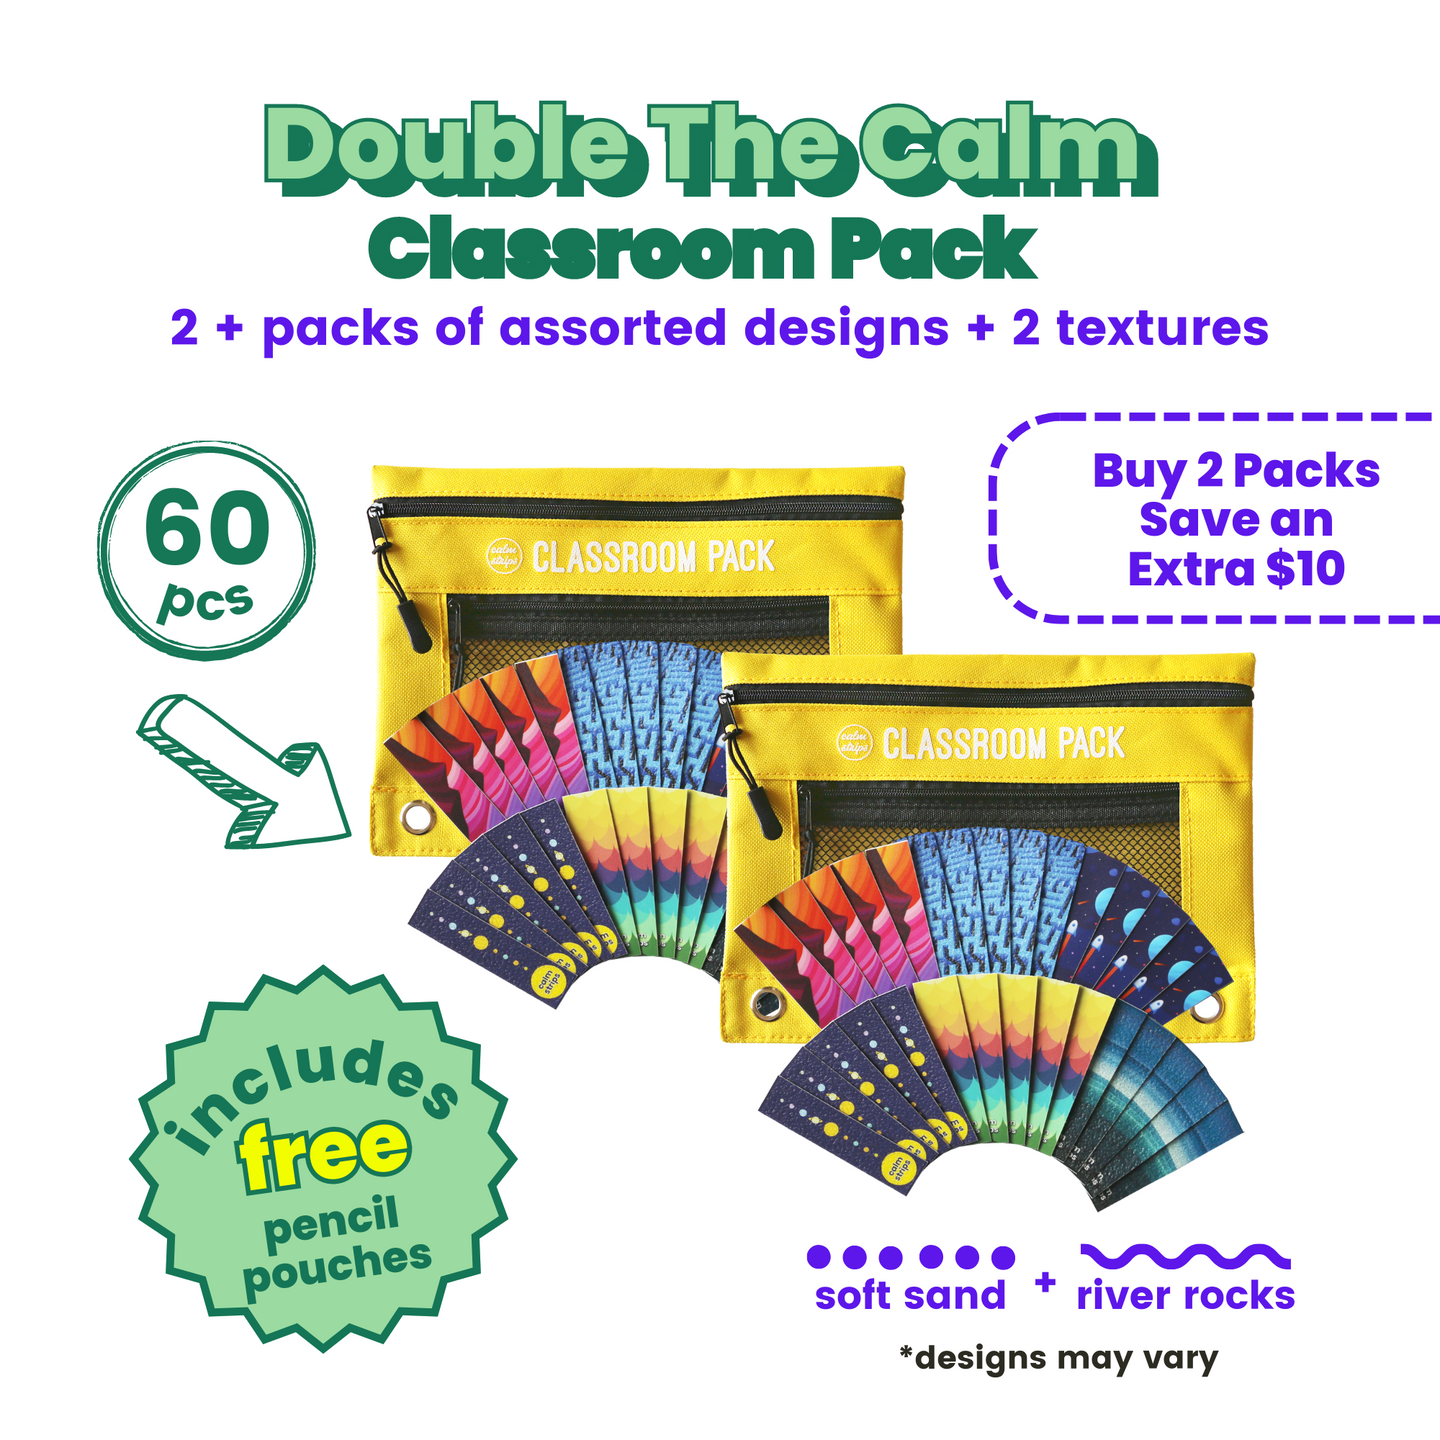 DOUBLE THE CALM CLASSROOM PACK